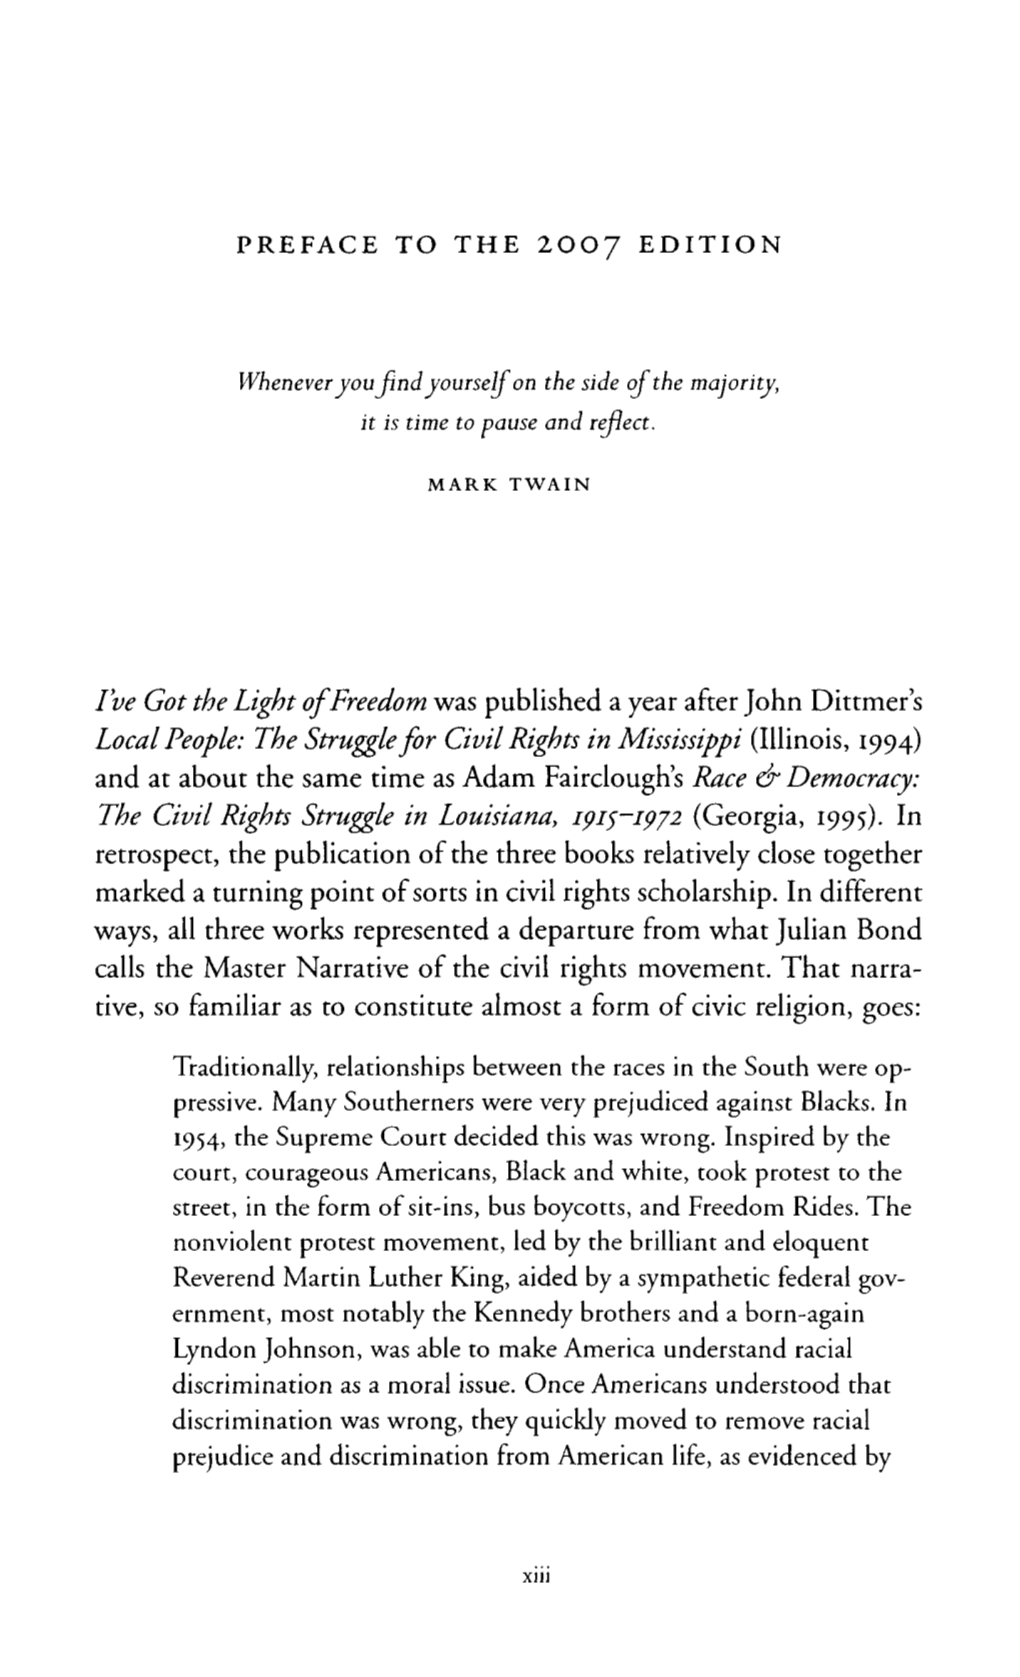 I've Got the Light of Freedom Was Published a Year After John Dittmer's Local People